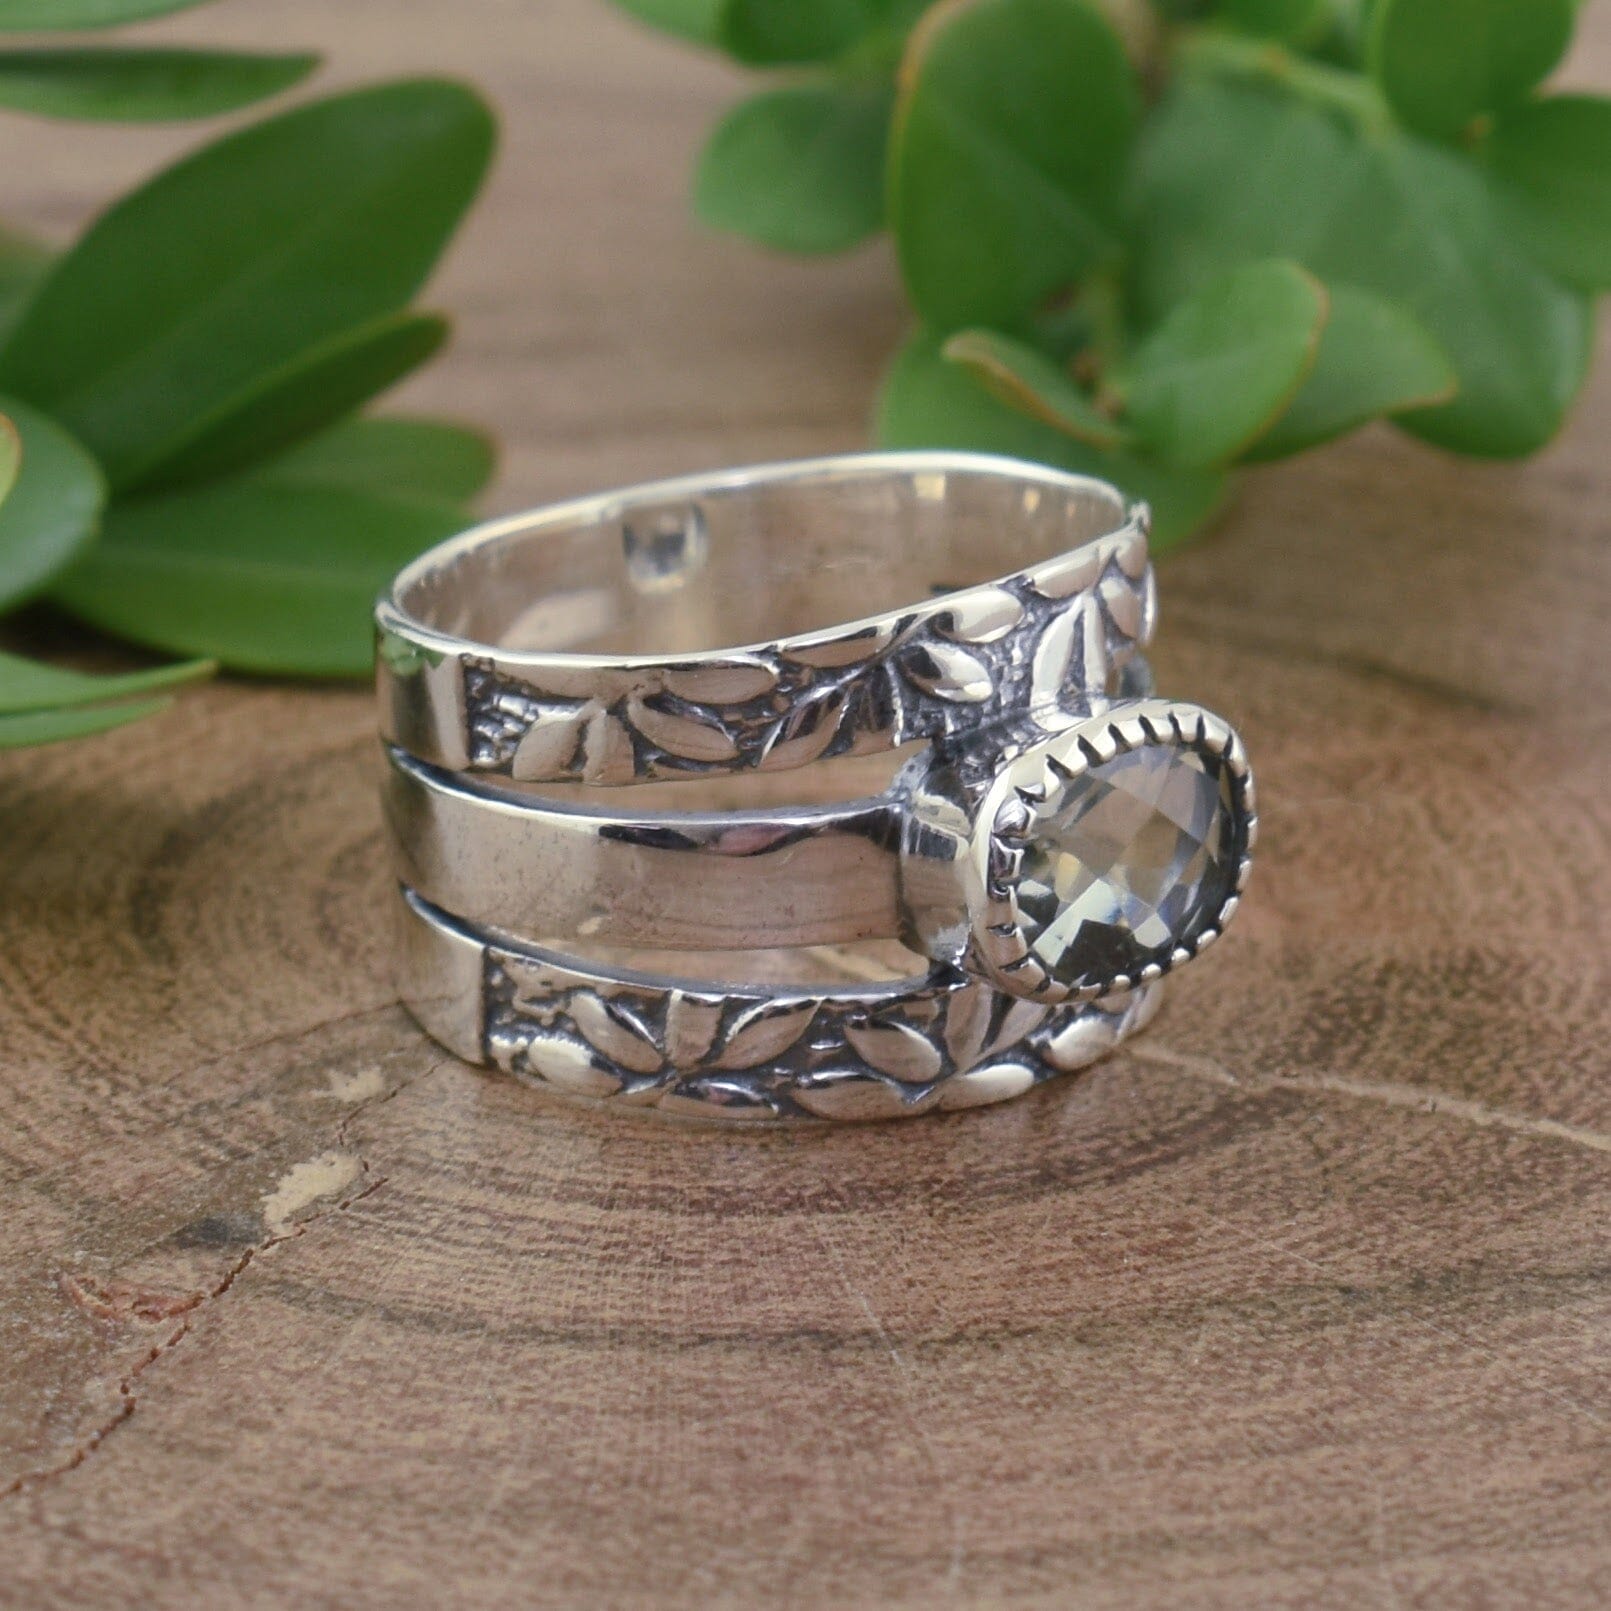 chunky sterling silver ring designed to look like three stack rings